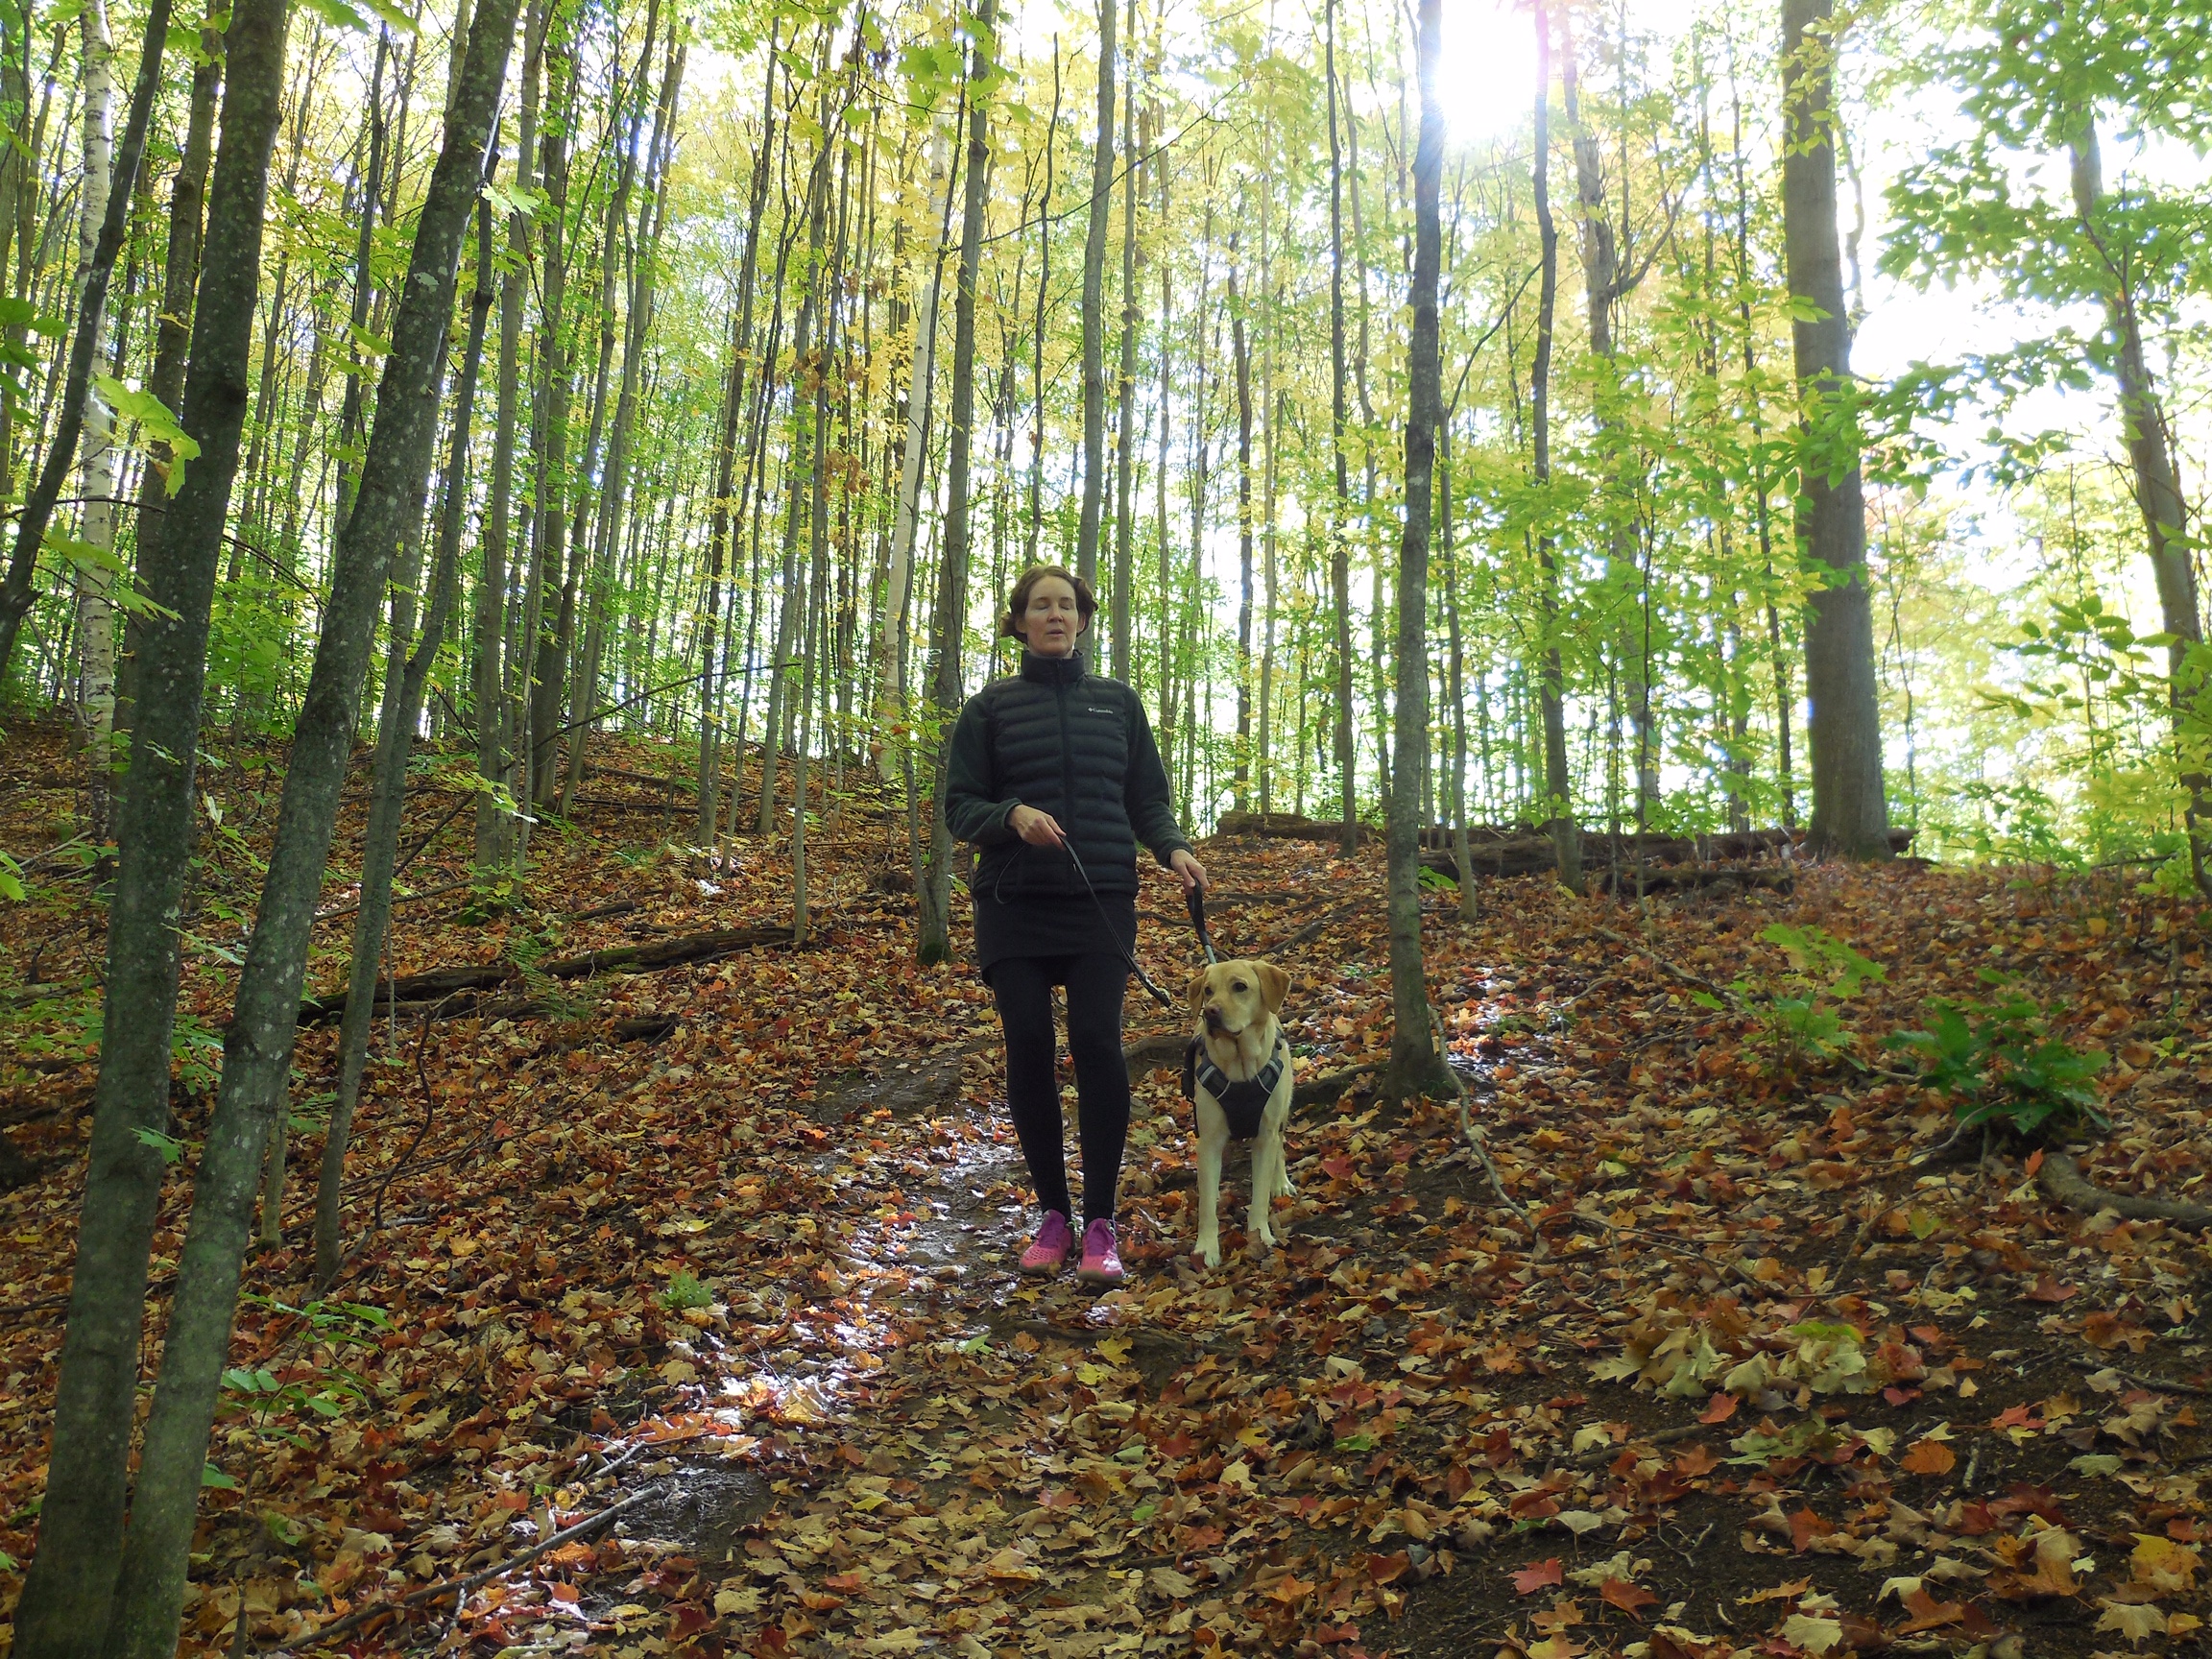 Marie-Clair and Rhonda, walking through a lush, green forest – the ground covered with colourful autumn leaves.